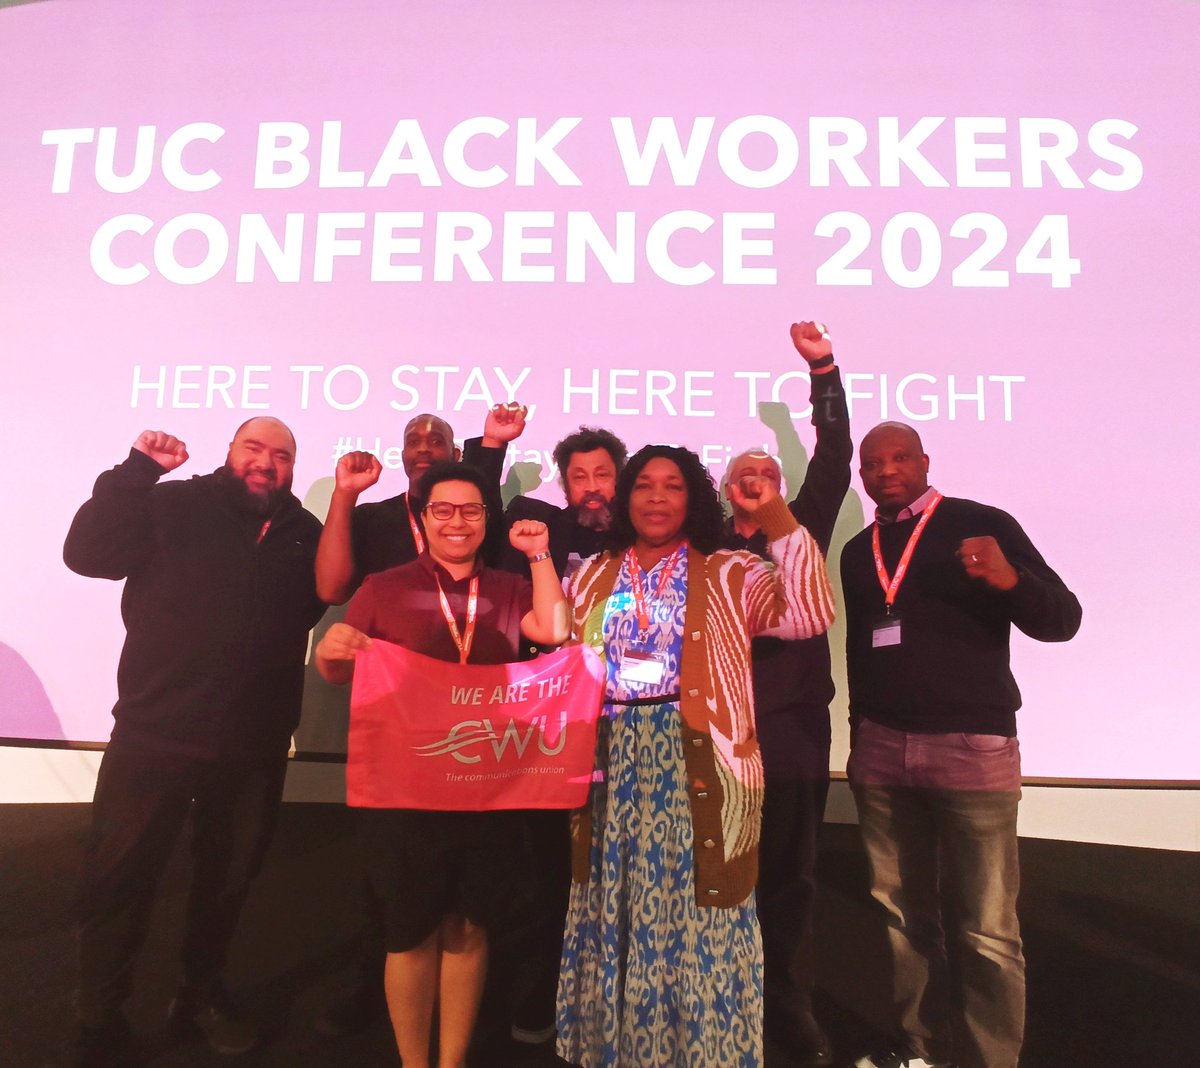 Day 3 of TUC Black Workers Conference 
#heretostayheretofight 
Discussing health inequalities facing black communities 
@nowak_paul @TUCEquality @CWUnews